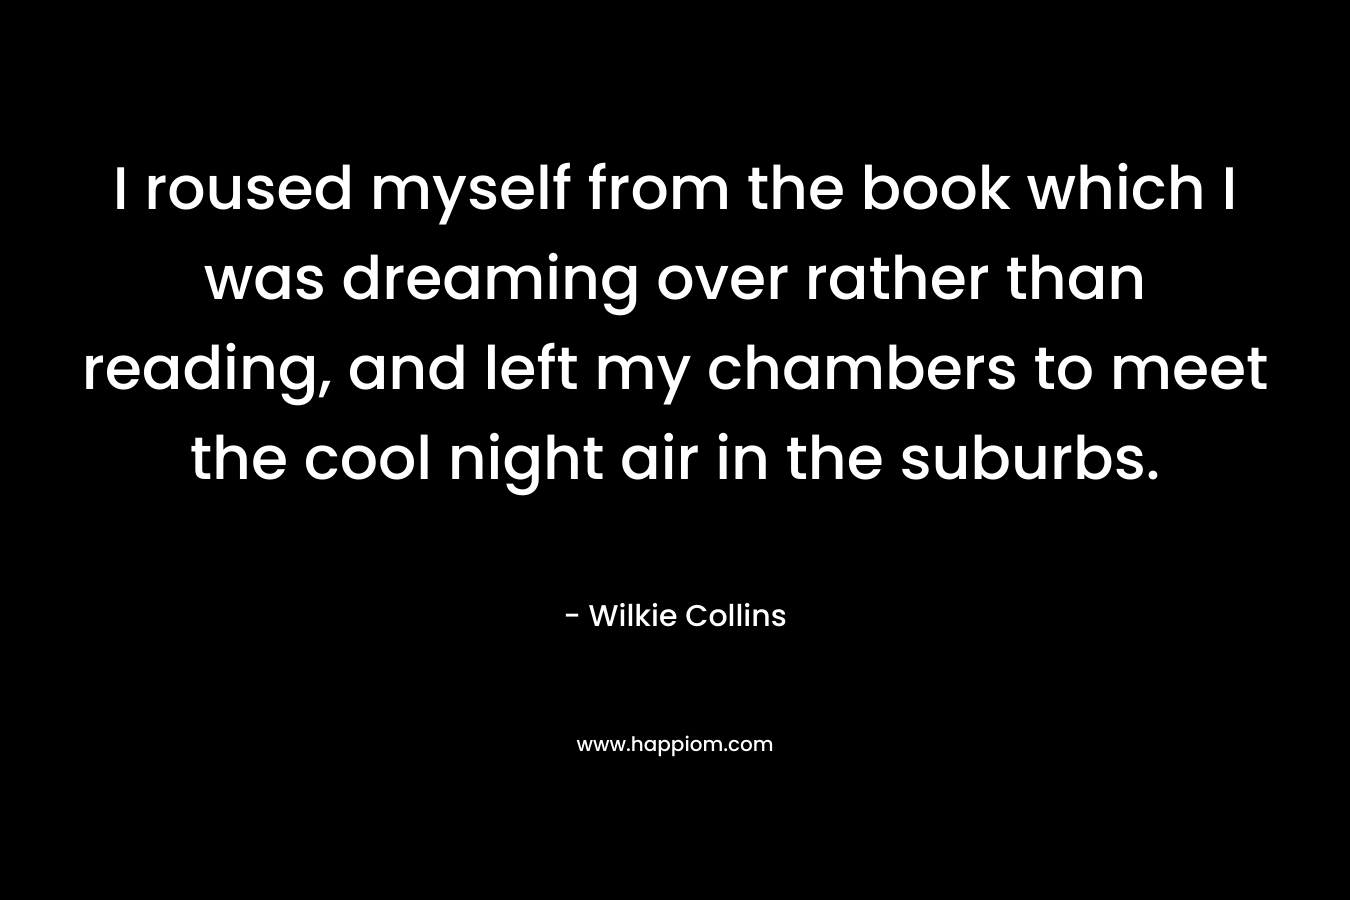 I roused myself from the book which I was dreaming over rather than reading, and left my chambers to meet the cool night air in the suburbs. – Wilkie Collins